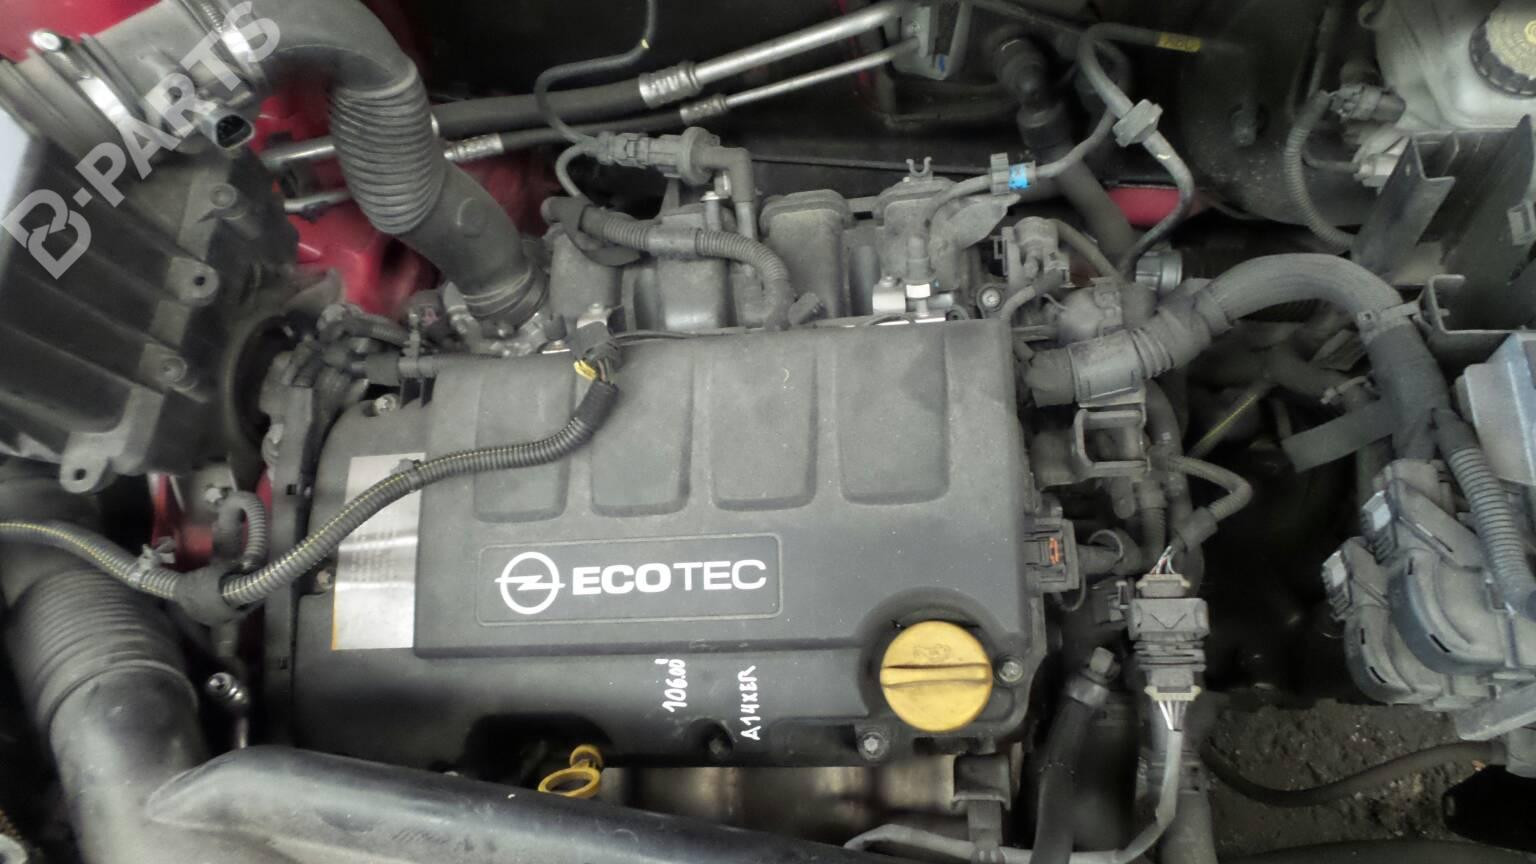 Where Can I Get Engine for Opel Corsa Utility 1.4 Engine Opel Corsa D (s07) 1.4 (l08, L68) A14xer B-parts Of Where Can I Get Engine for Opel Corsa Utility 1.4